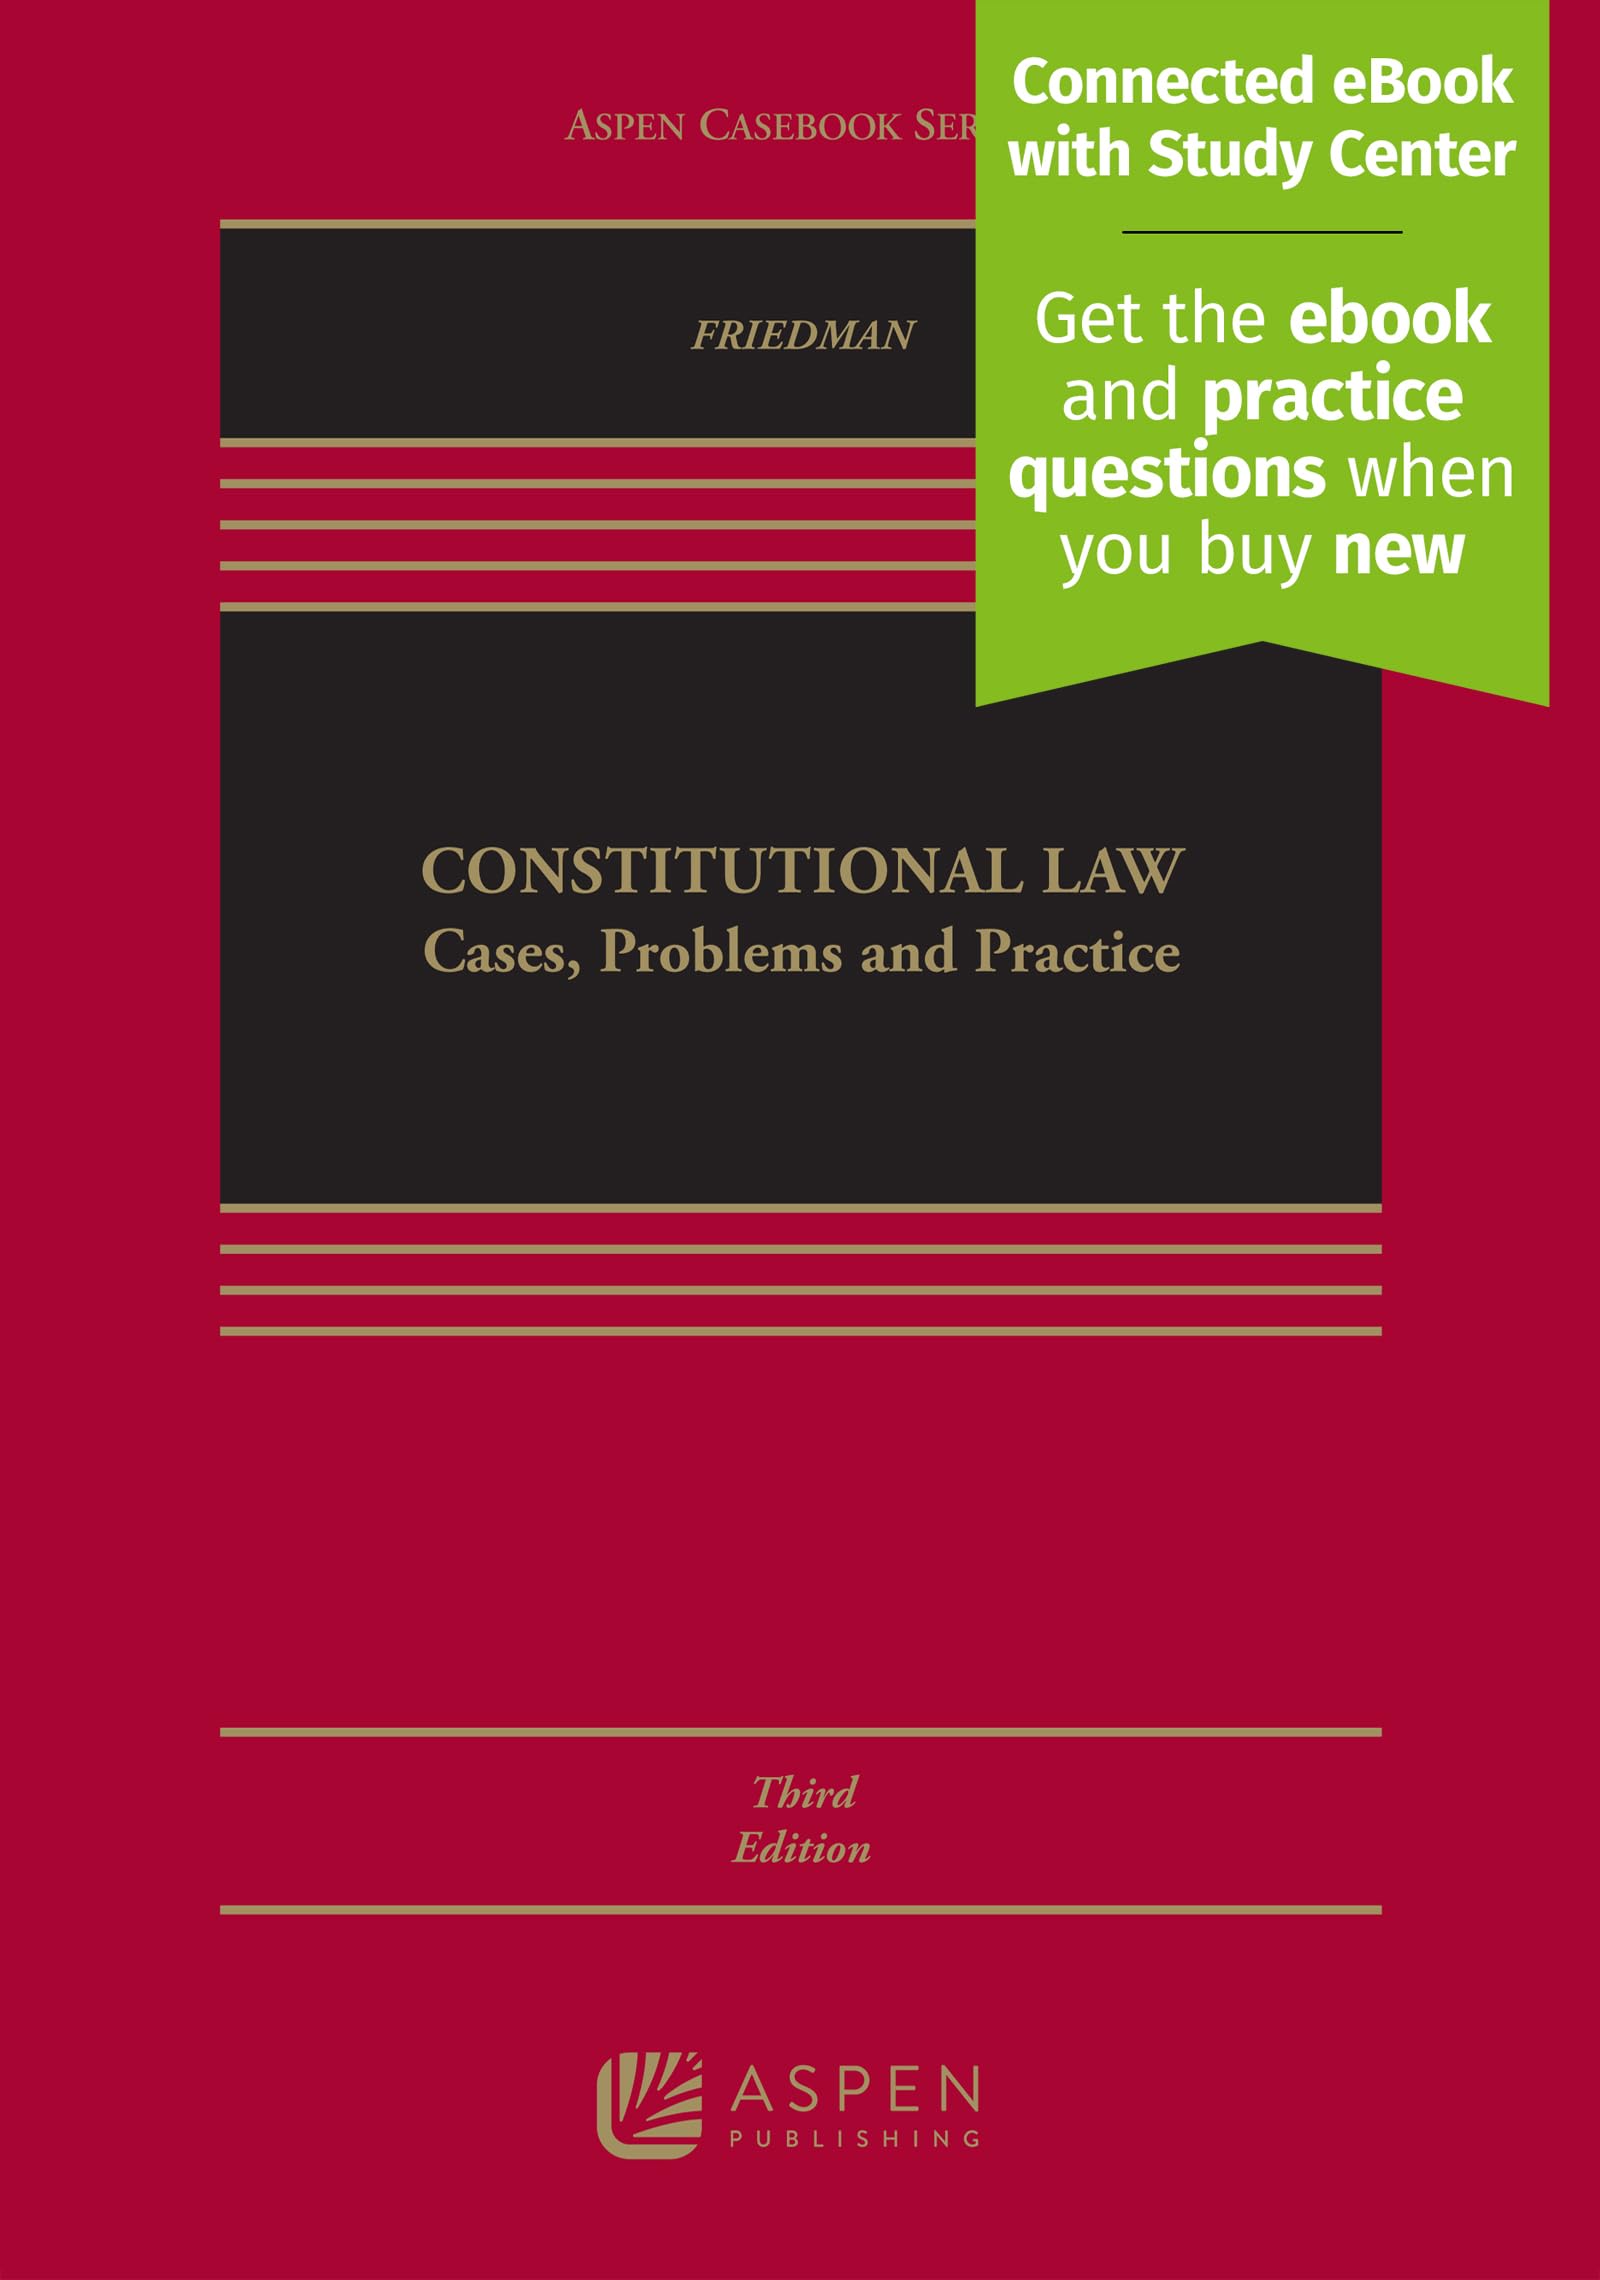 Modern Constitutional Law: Cases, Problems and Practice [Connected eBook with Study Center] (Aspen Casebook)